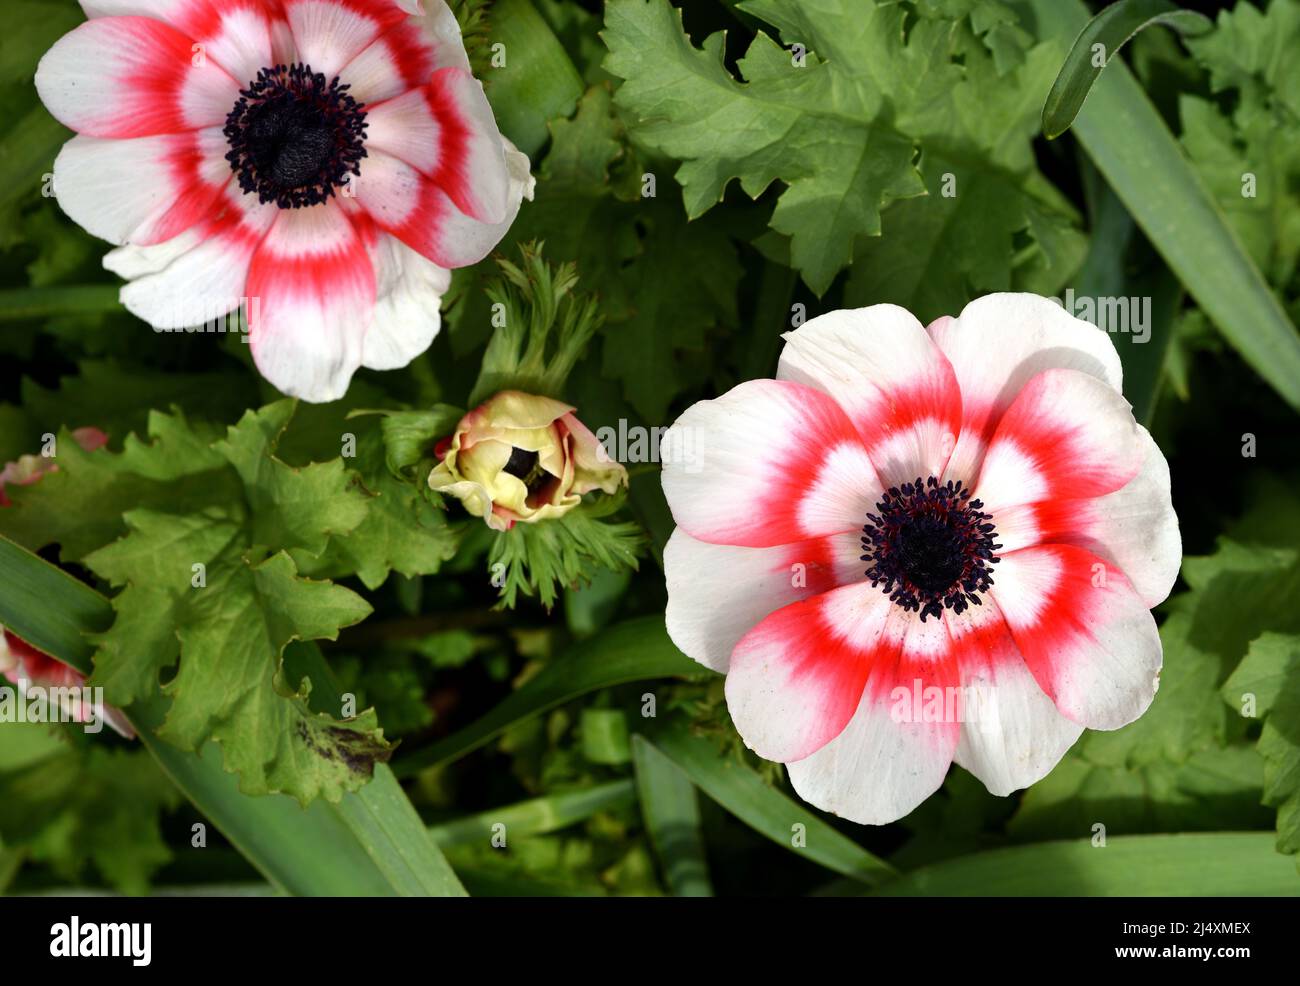 Closeup of the red and white flowers of Anemone Coronaria. Stock Photo